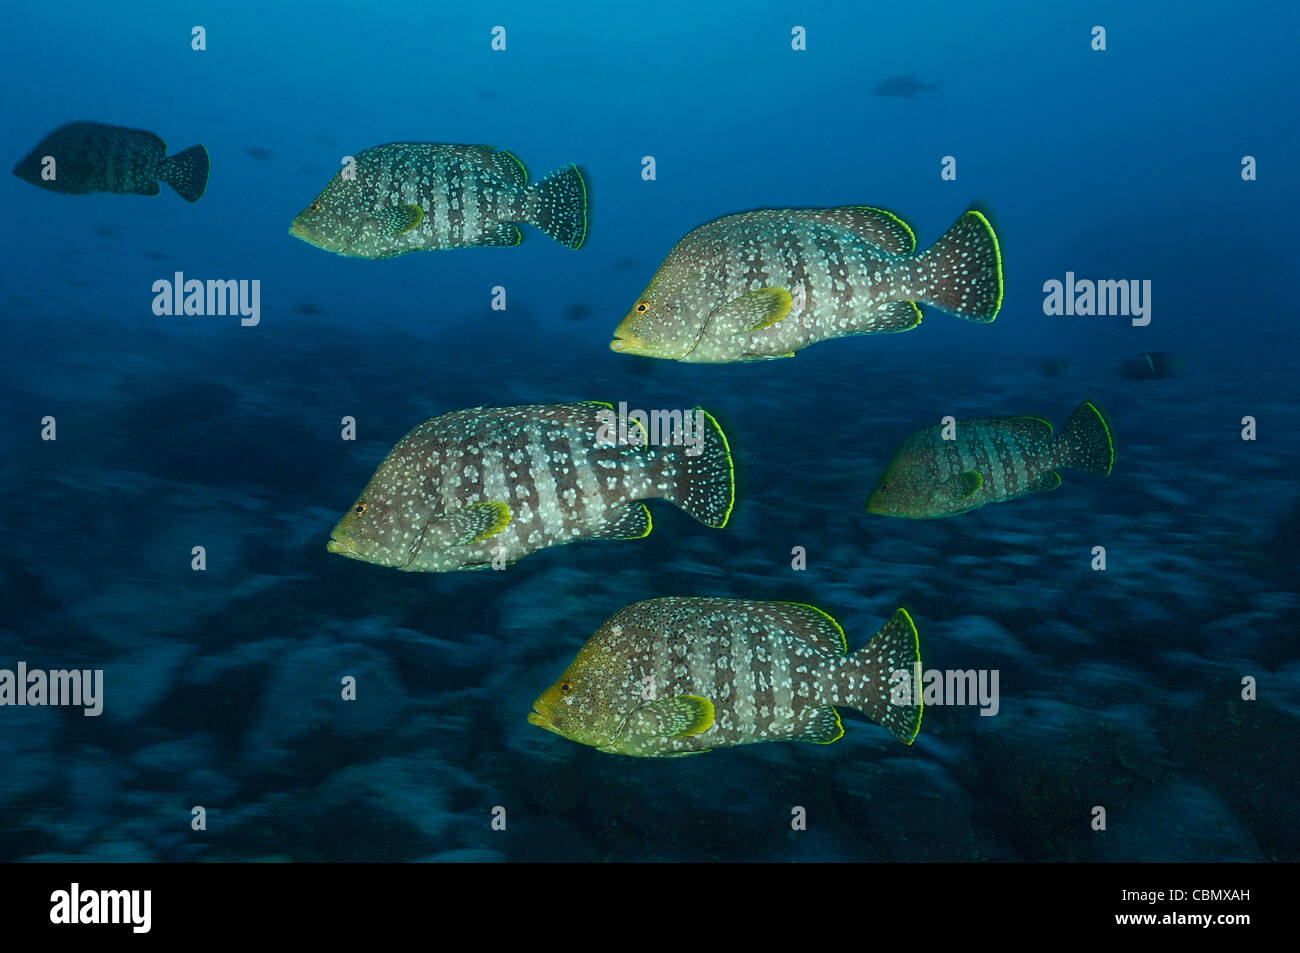 Group of Leather Bass, Dermatolepis dermatolepis, Banco Hannibal, East Pacific Ocean, Panama Stock Photo